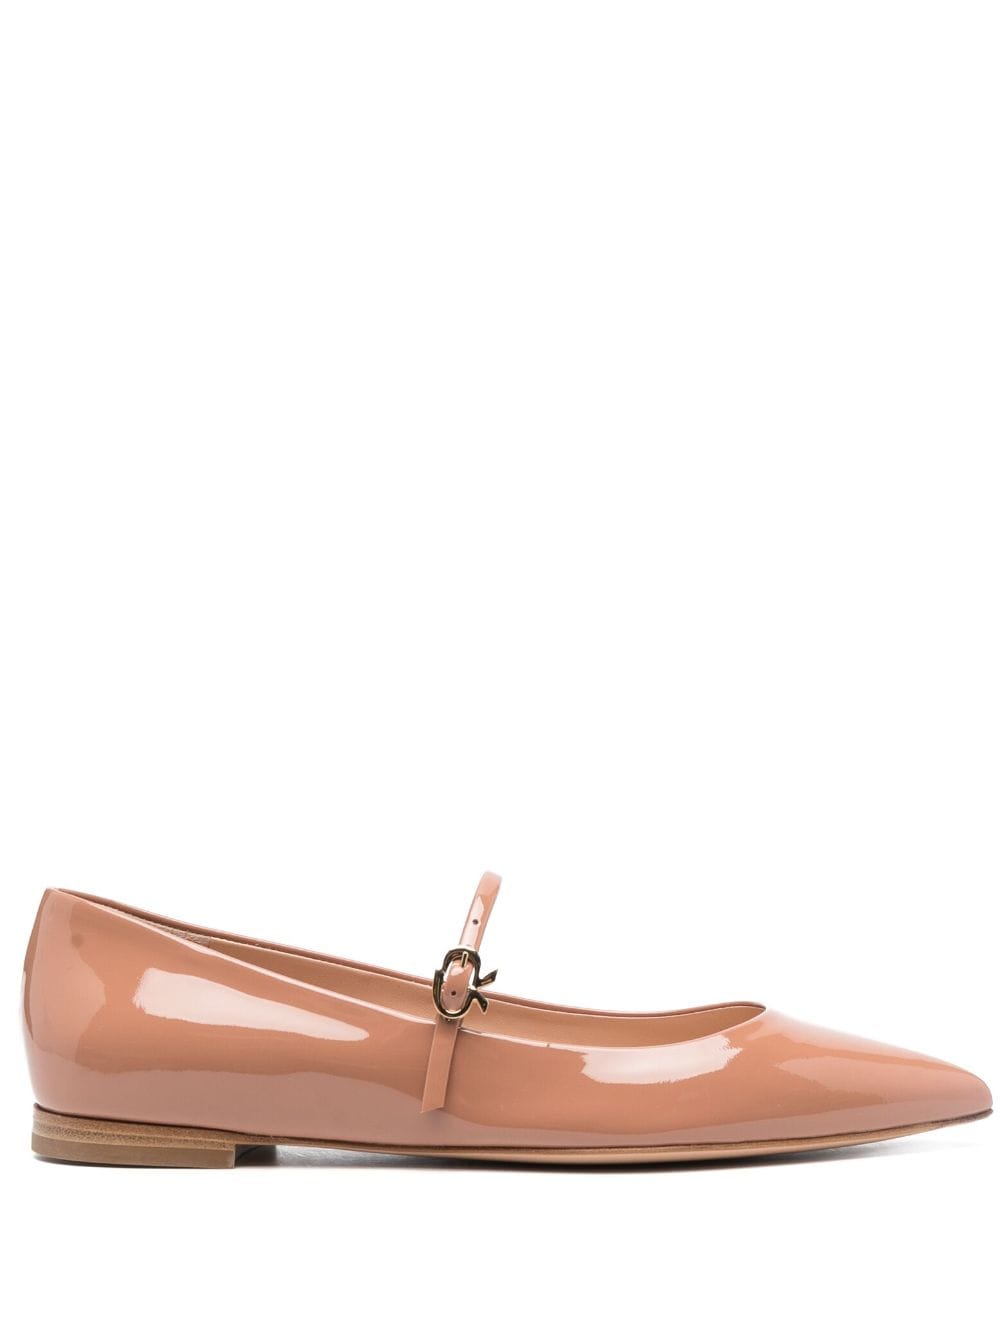 Gianvito Rossi Pointed-toe Buckle-strap Ballerina Shoes For Women In Beige